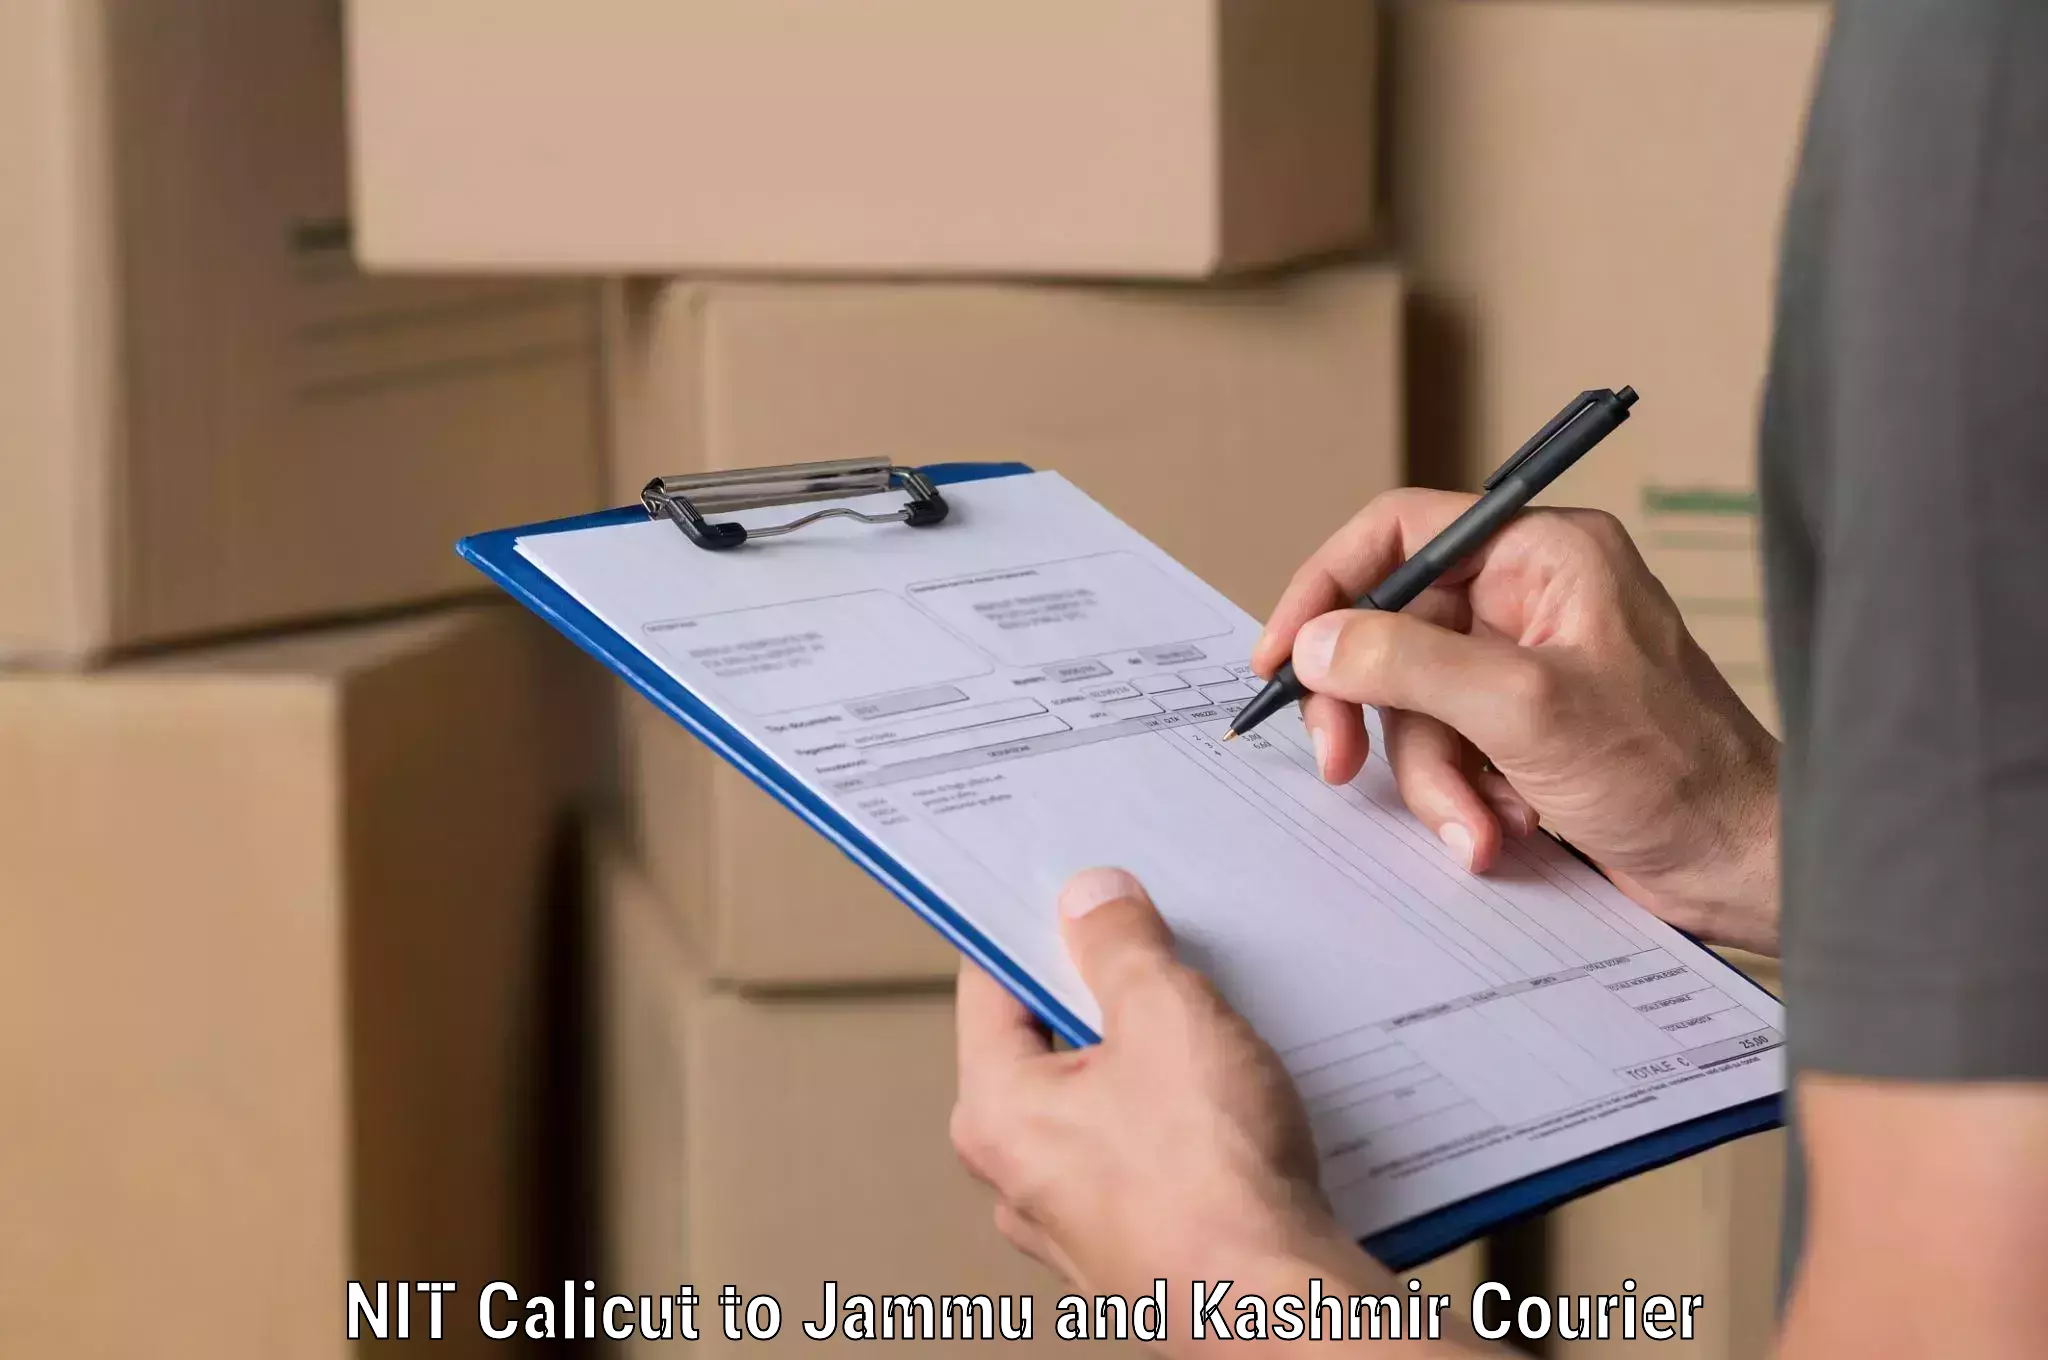 Quality courier services NIT Calicut to Jammu and Kashmir